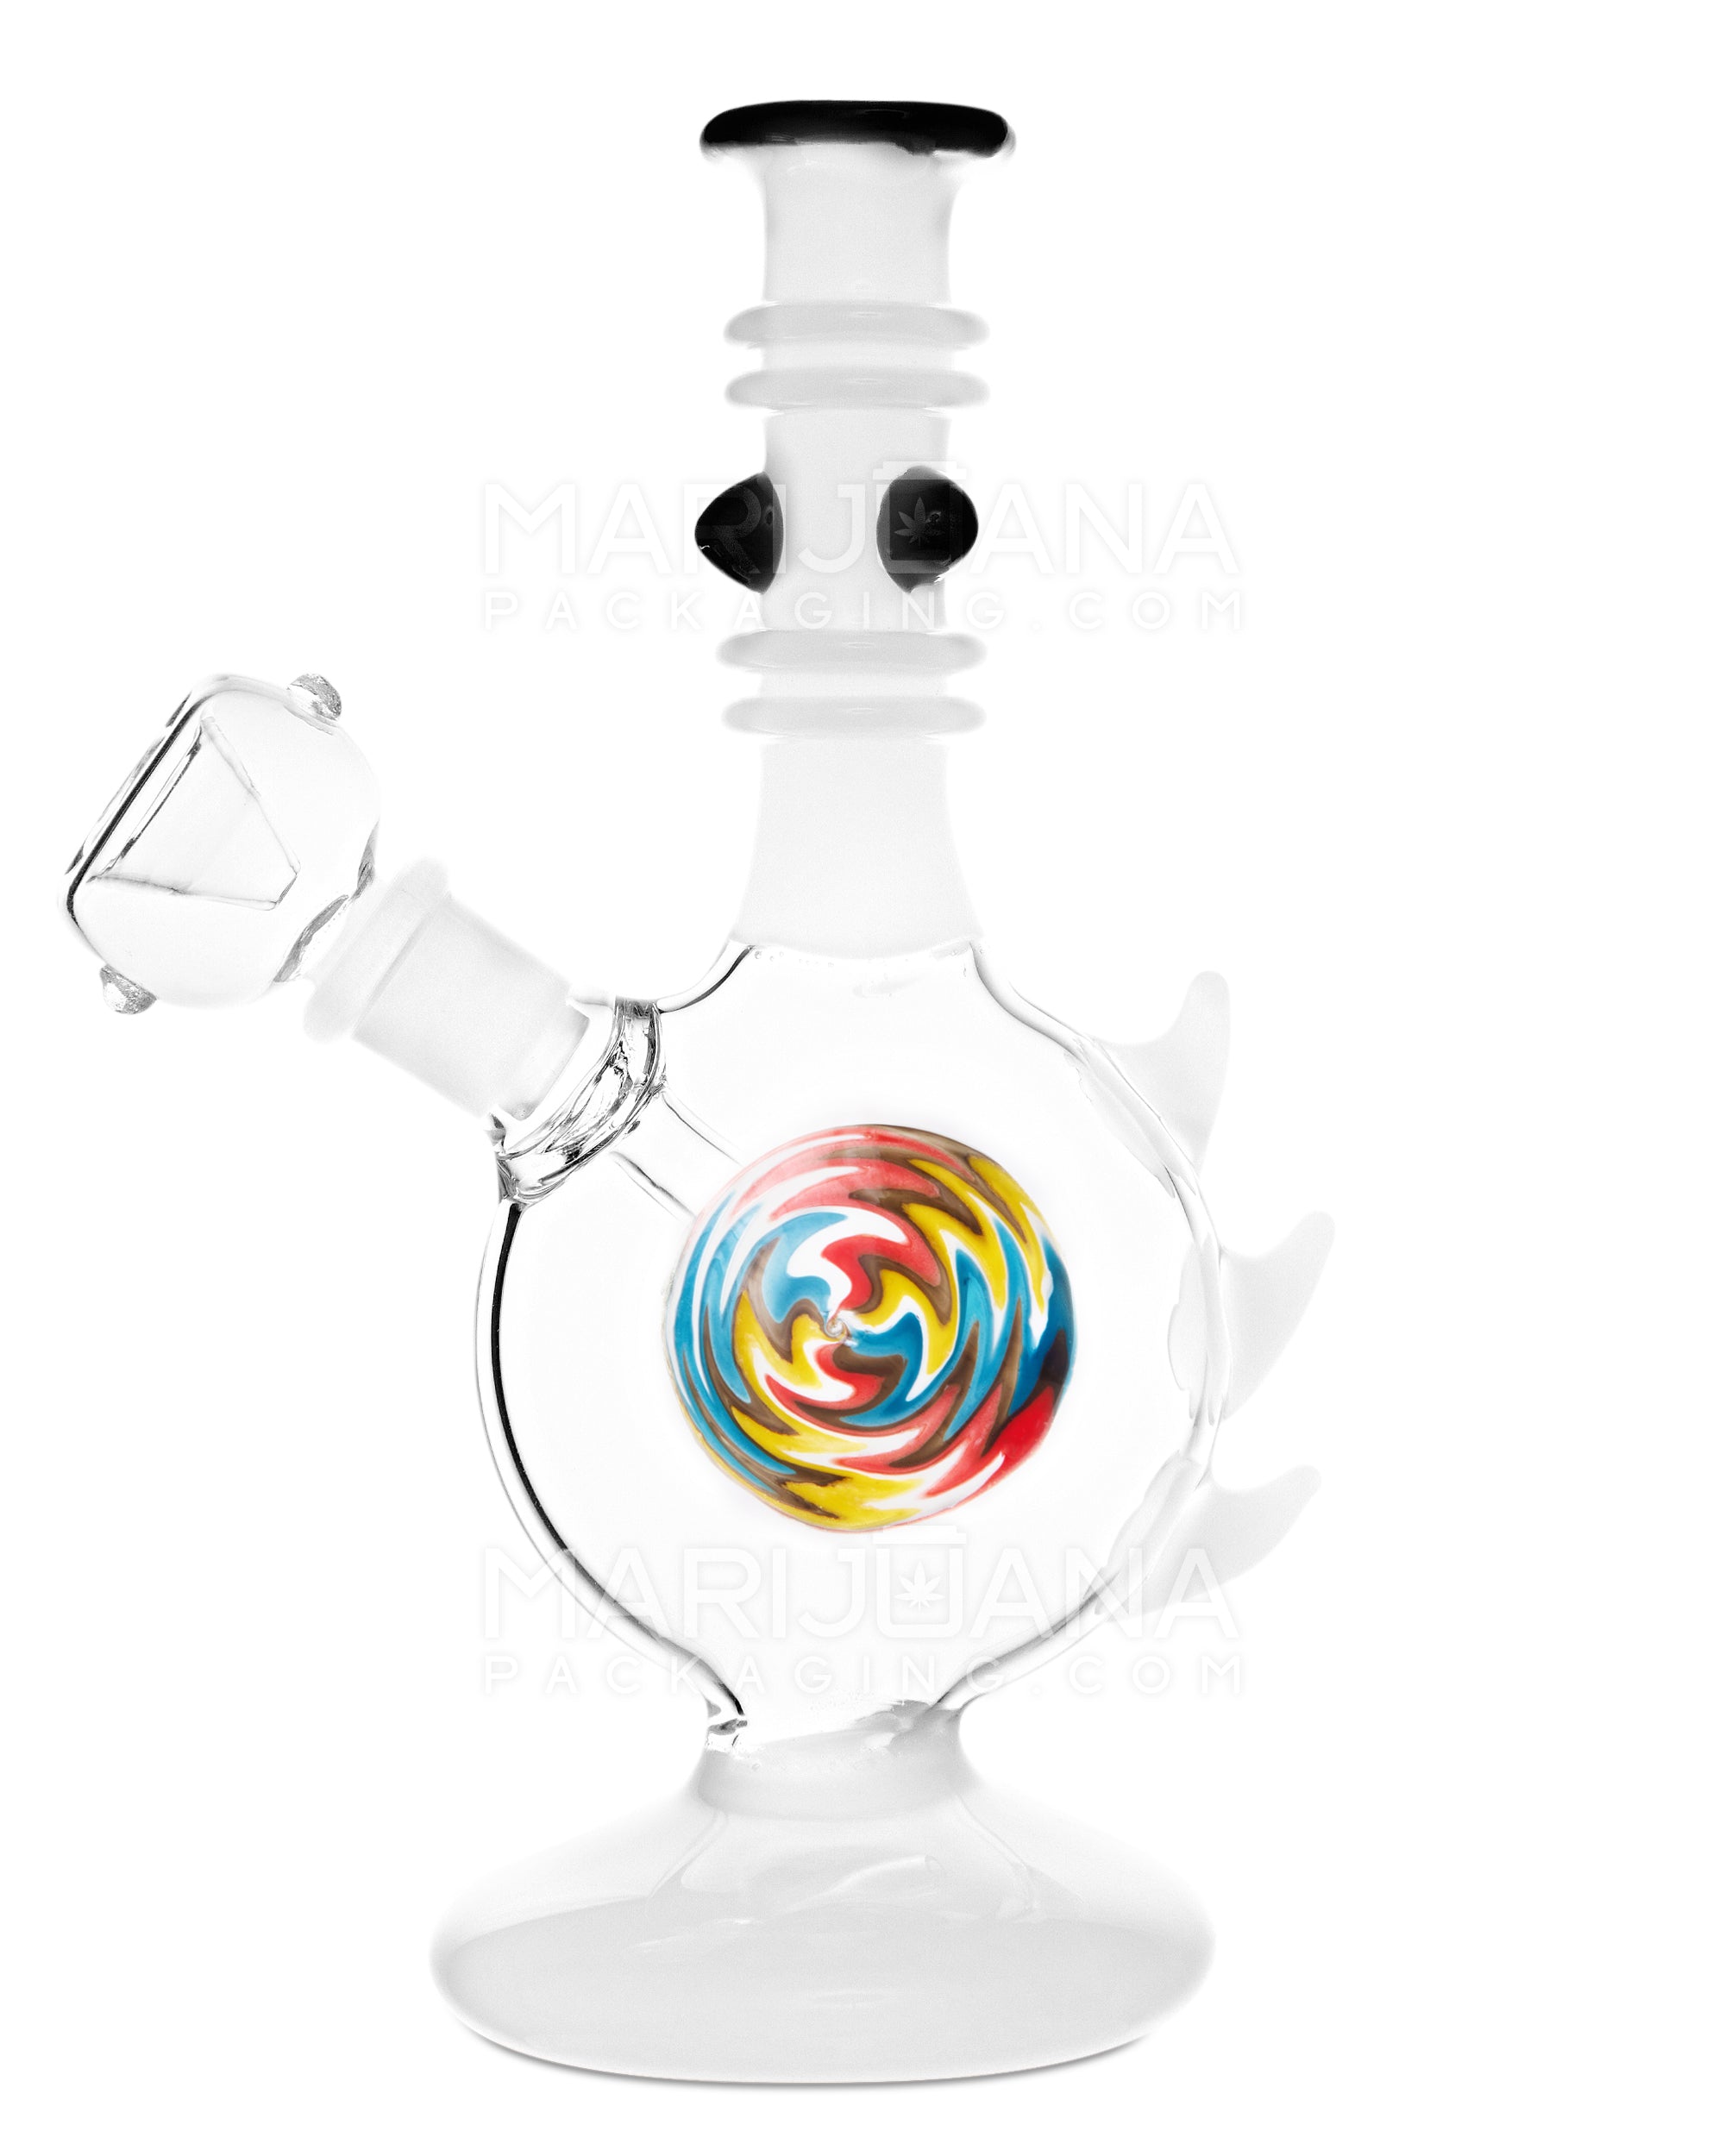 Straight Neck Wig Wag Circular Flask Glass Water Pipe w/ Triple Spikes | 8in Tall - 14mm Bowl - White - 1